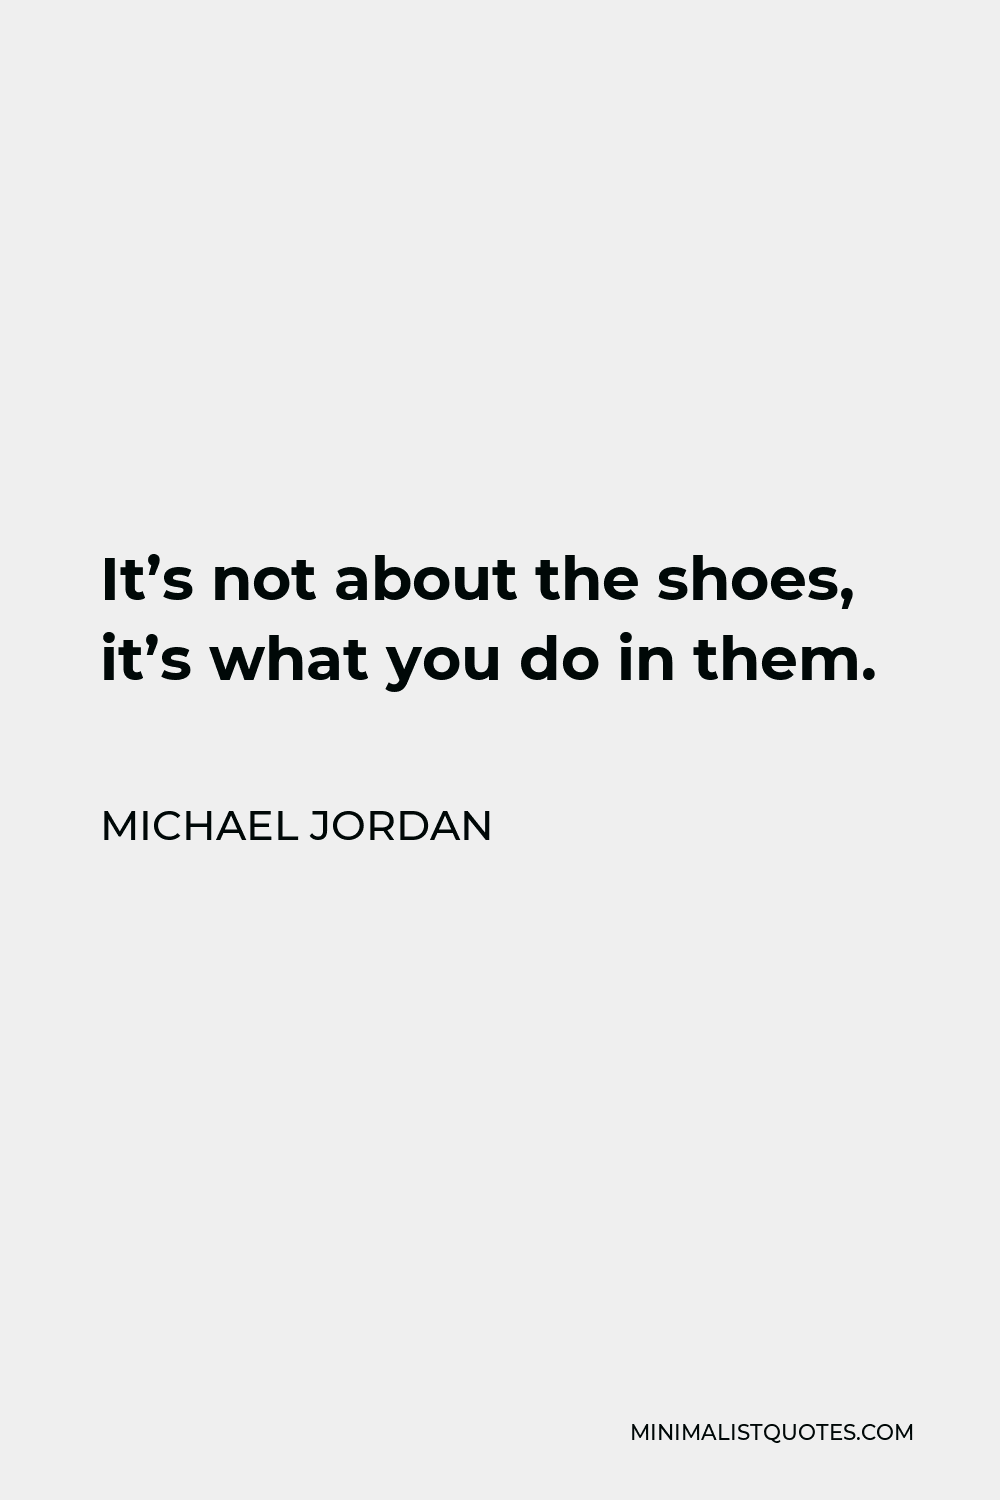 Michael Jordan Quote - It’s not about the shoes, it’s what you do in them.